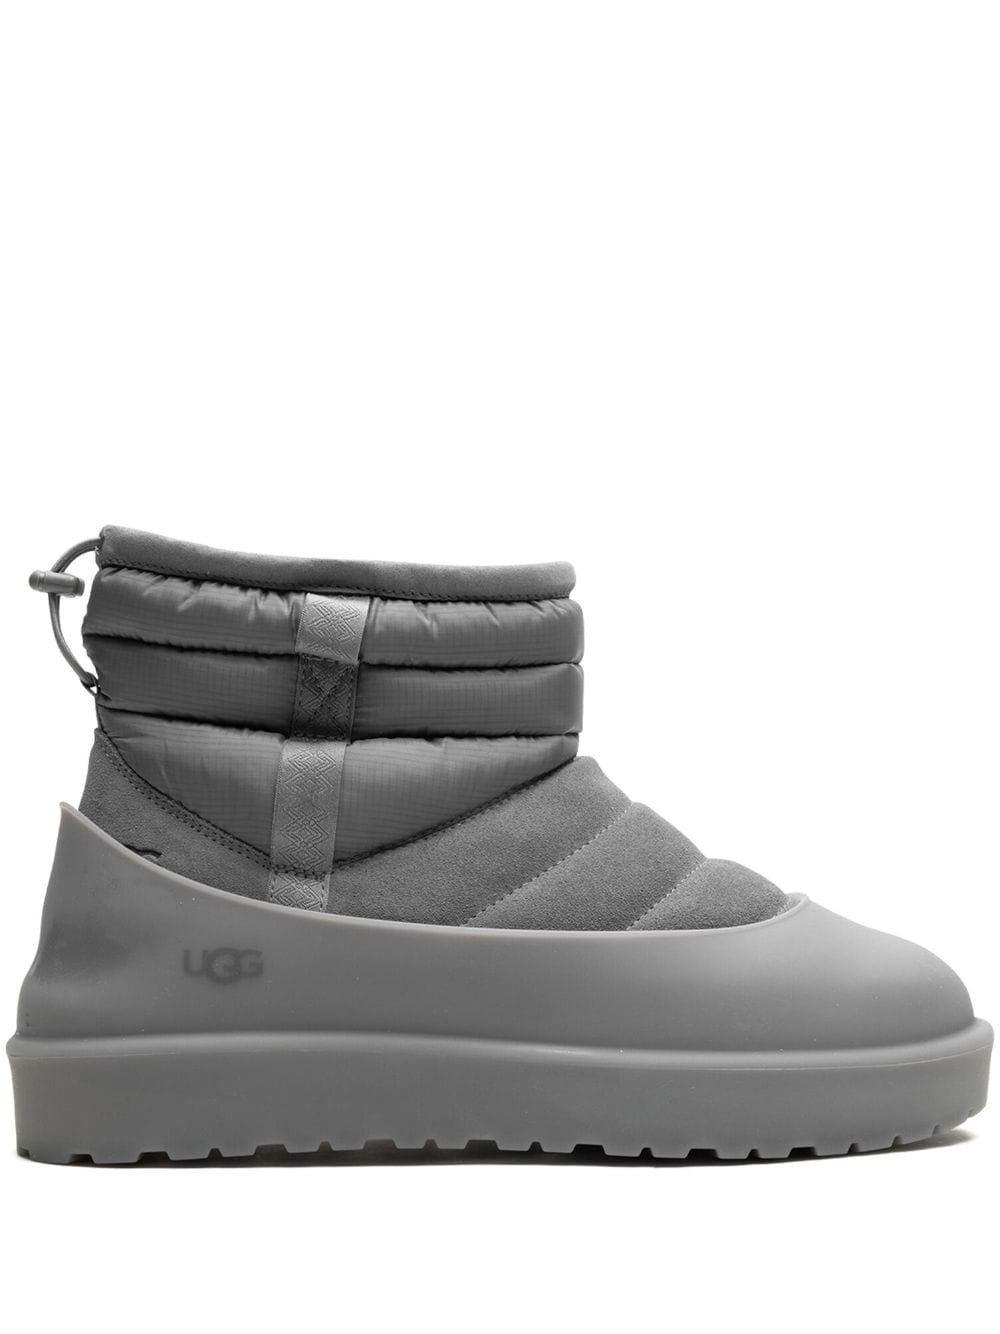 UGG Classic Mini "Metal Grey" pull-on weather boots von UGG